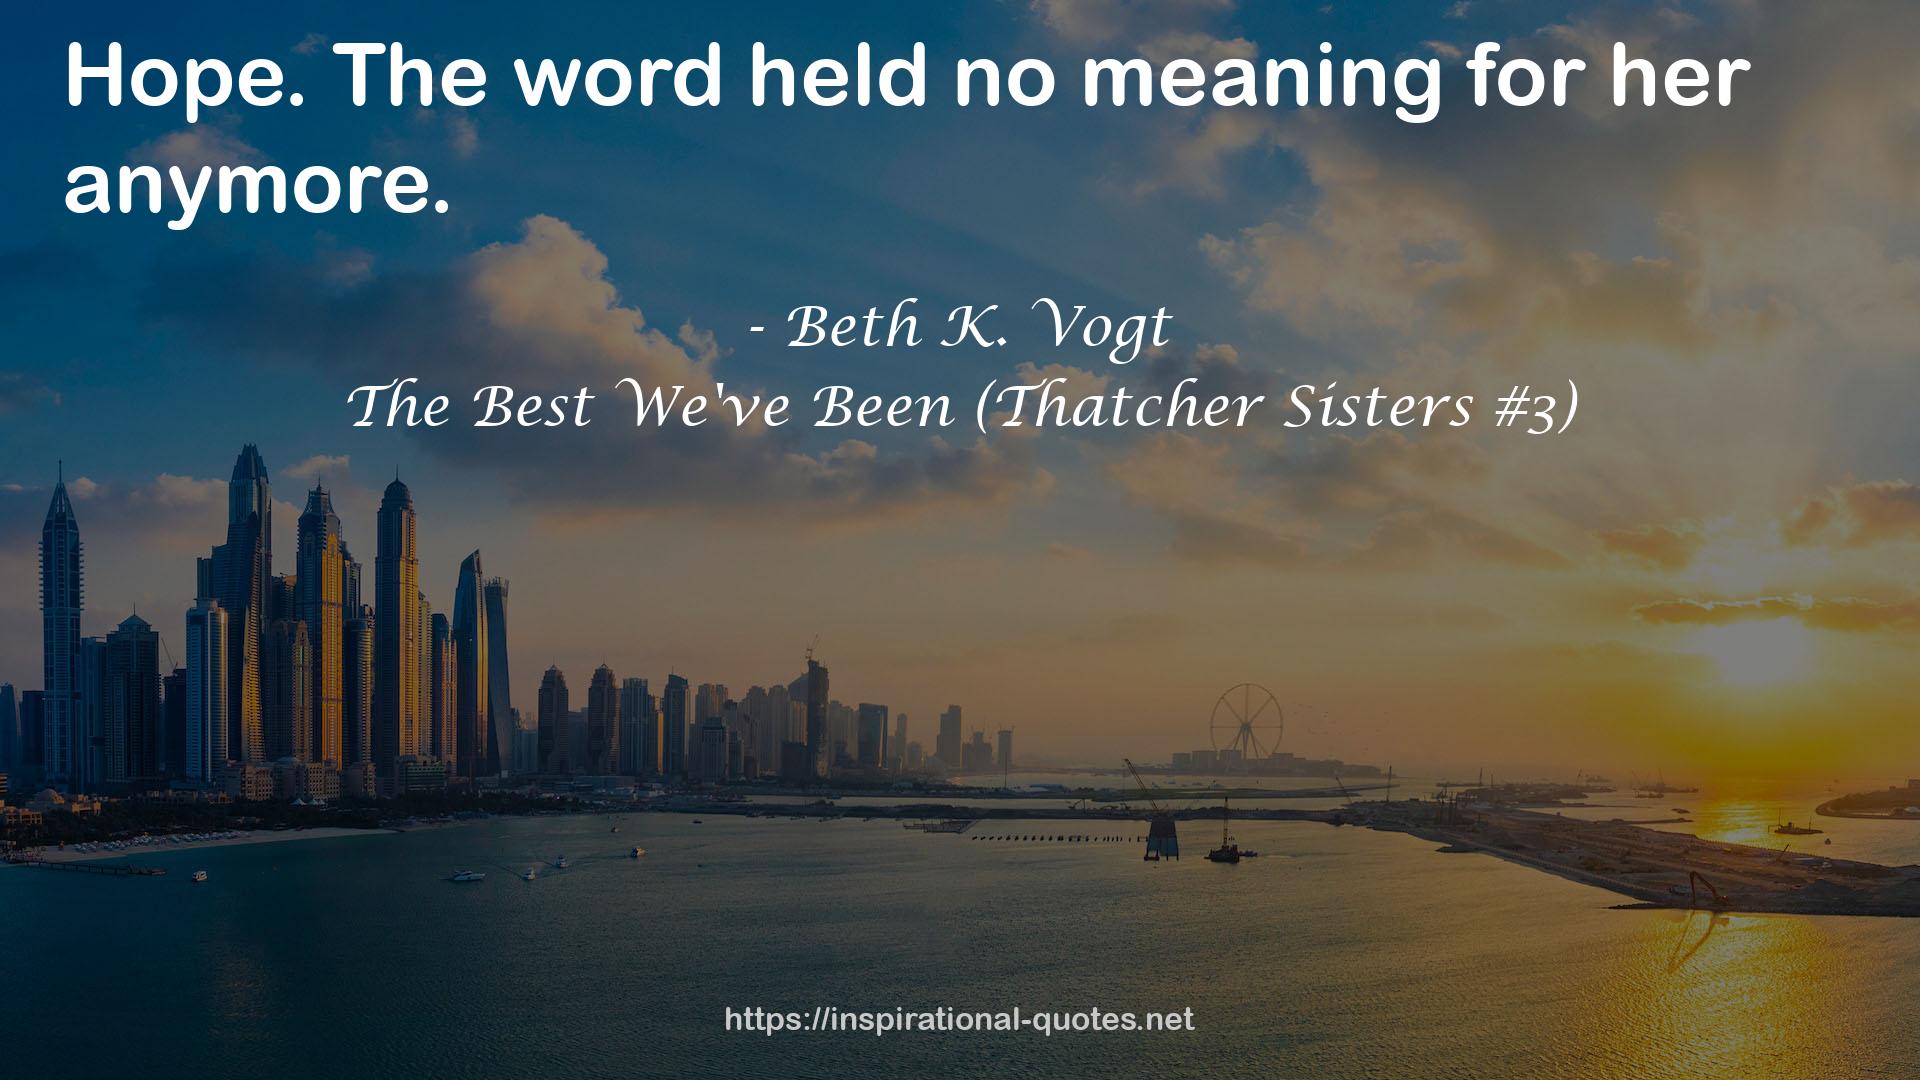 The Best We've Been (Thatcher Sisters #3) QUOTES